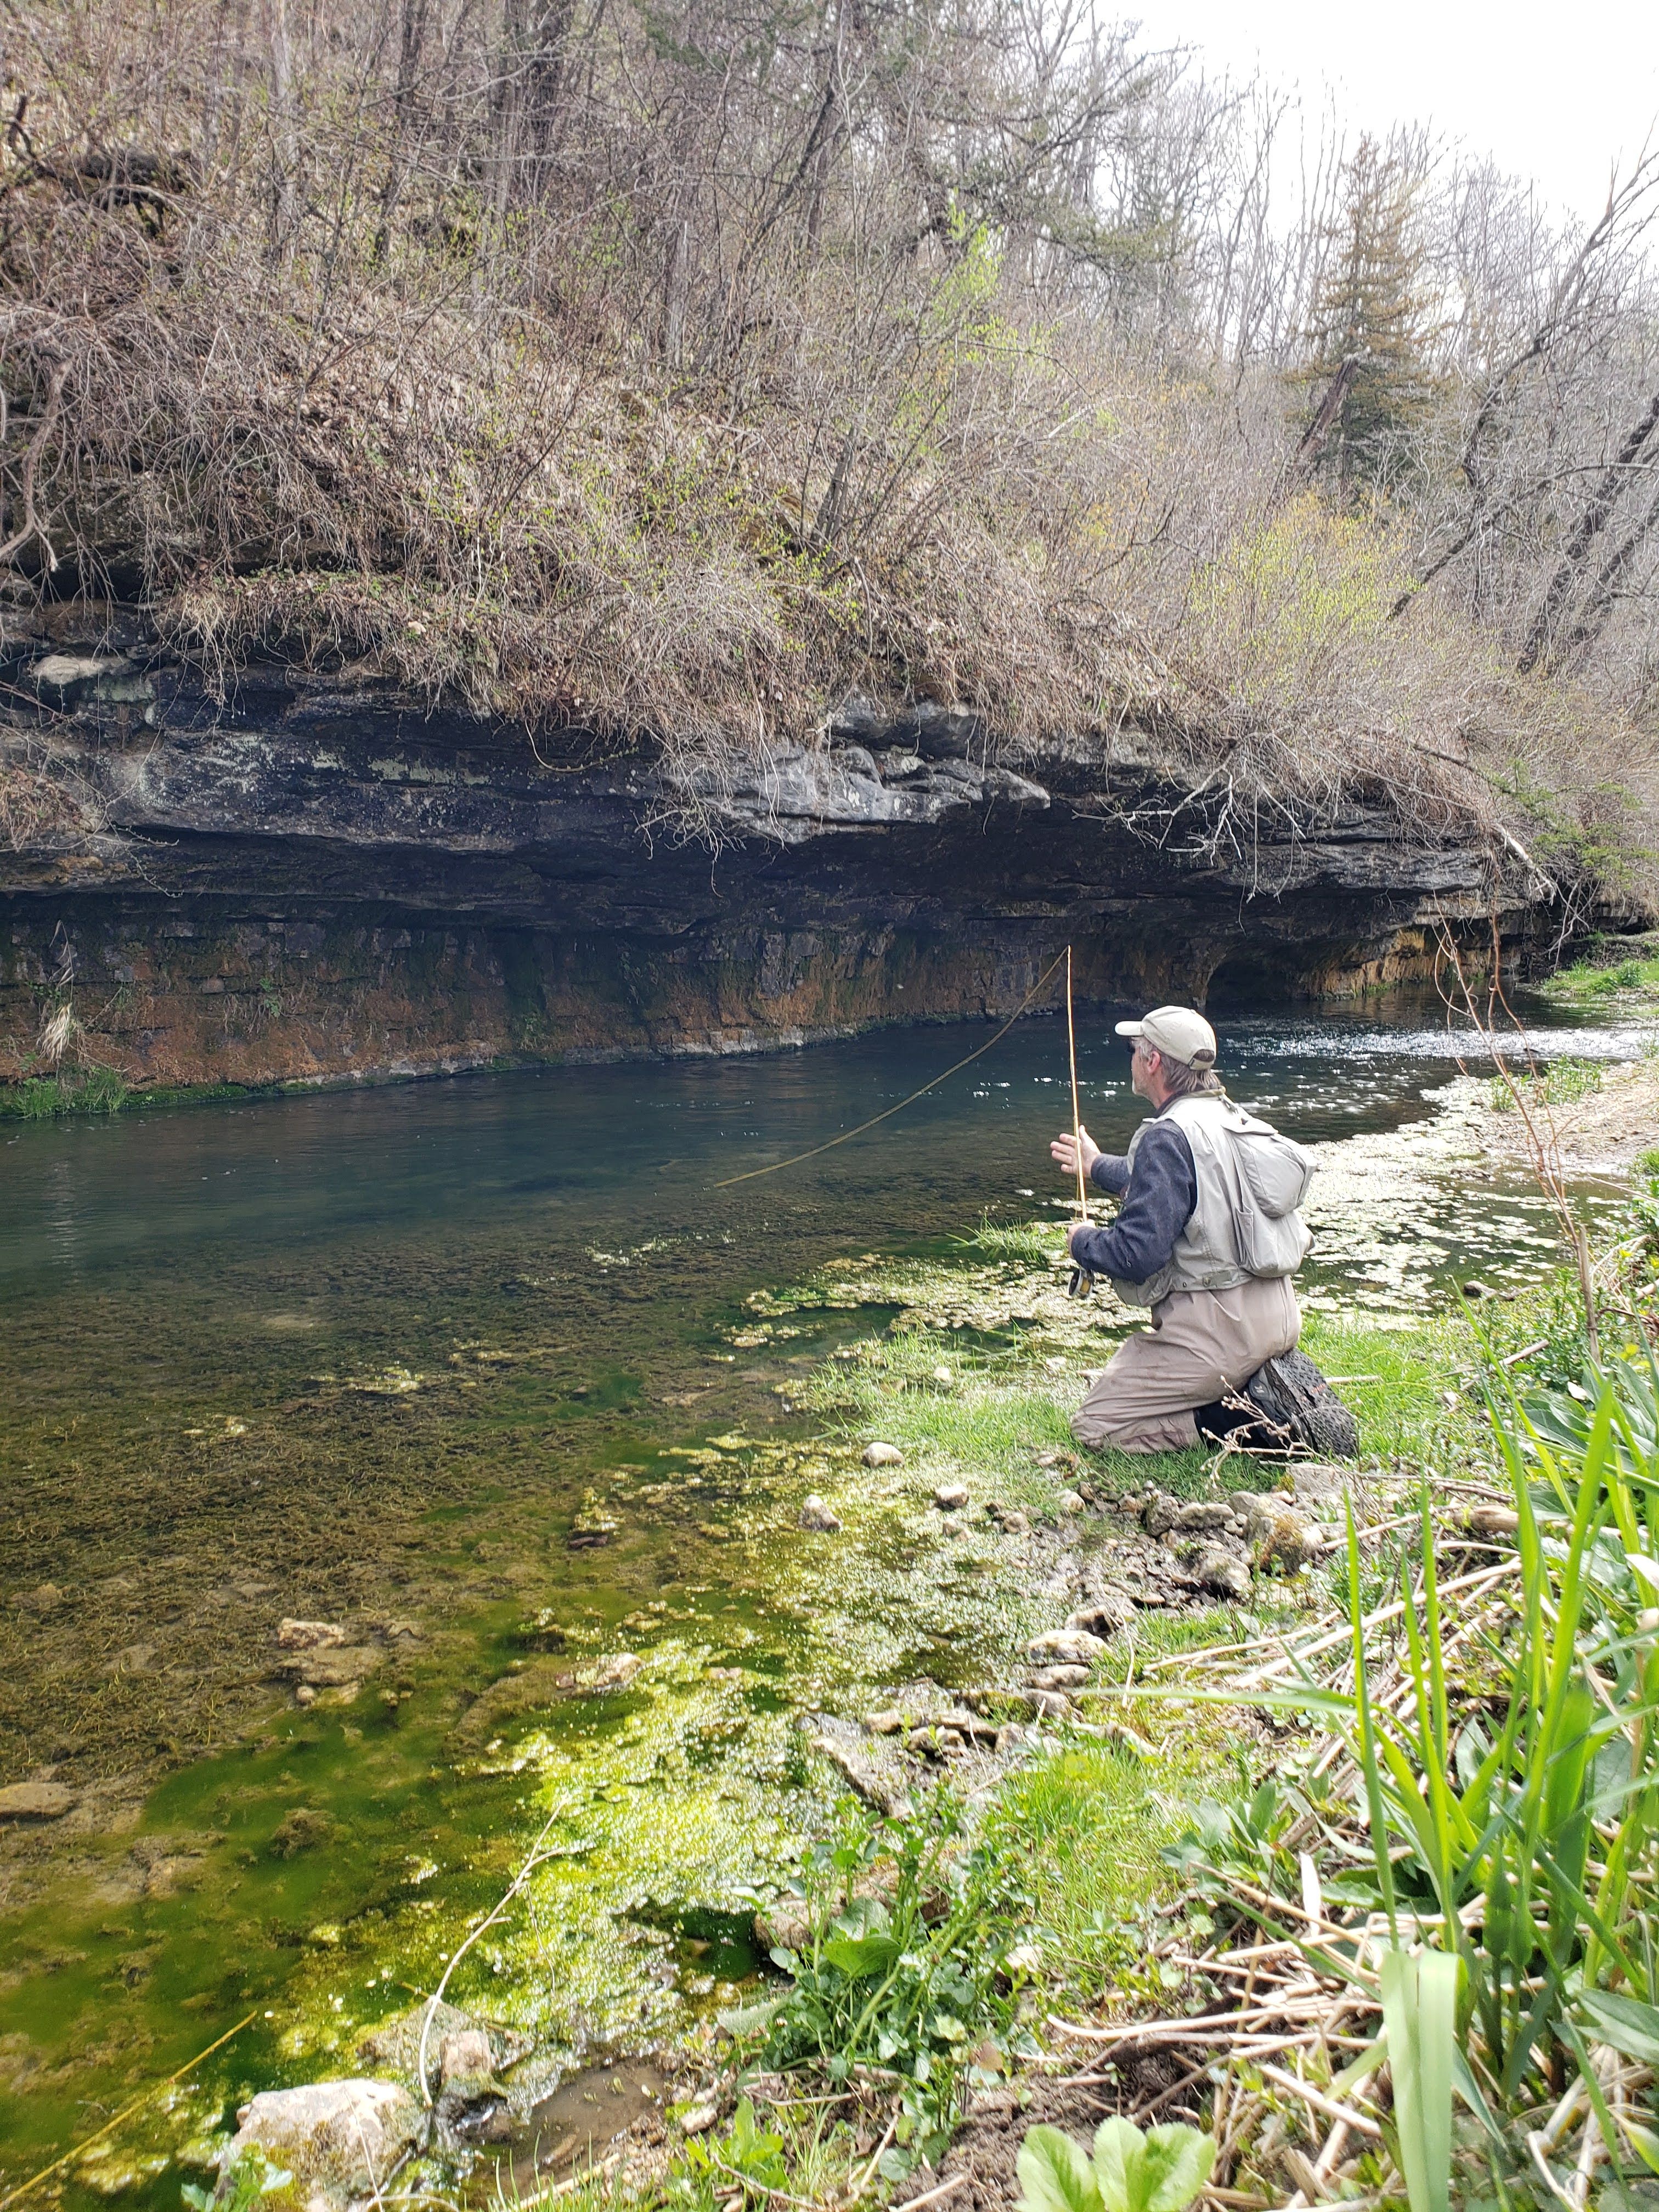 Sometimes you have to get sneaky in the driftless